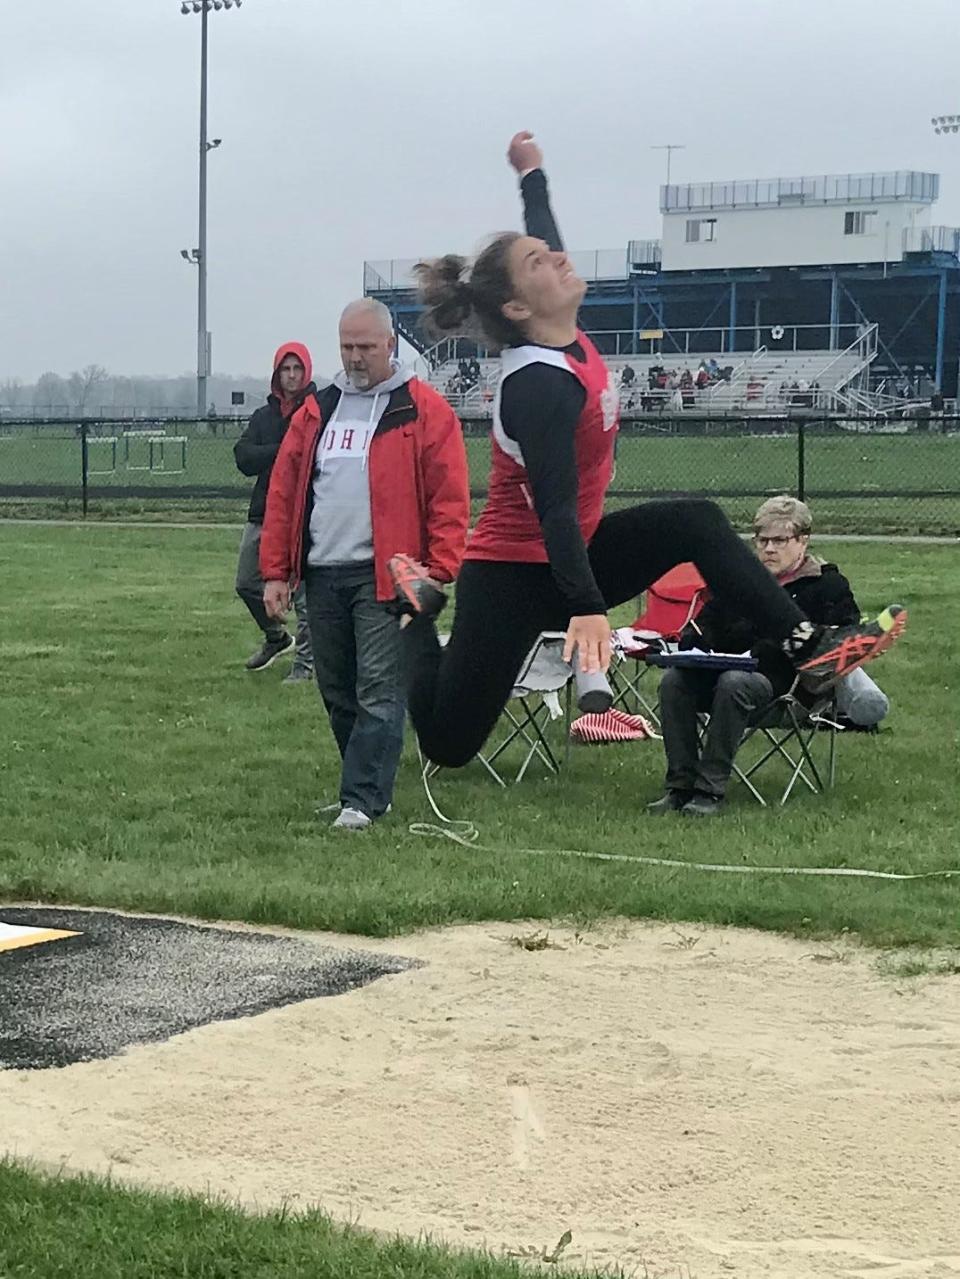 Elgin's Tiffany Hix, shown competing in the girls long jump at this year's Marion County Track Meet at River Valley, will perform in the pole vault at this weekend's state track and field championships at Ohio State's Jesse Owens Memorial Stadium, going in Division III.